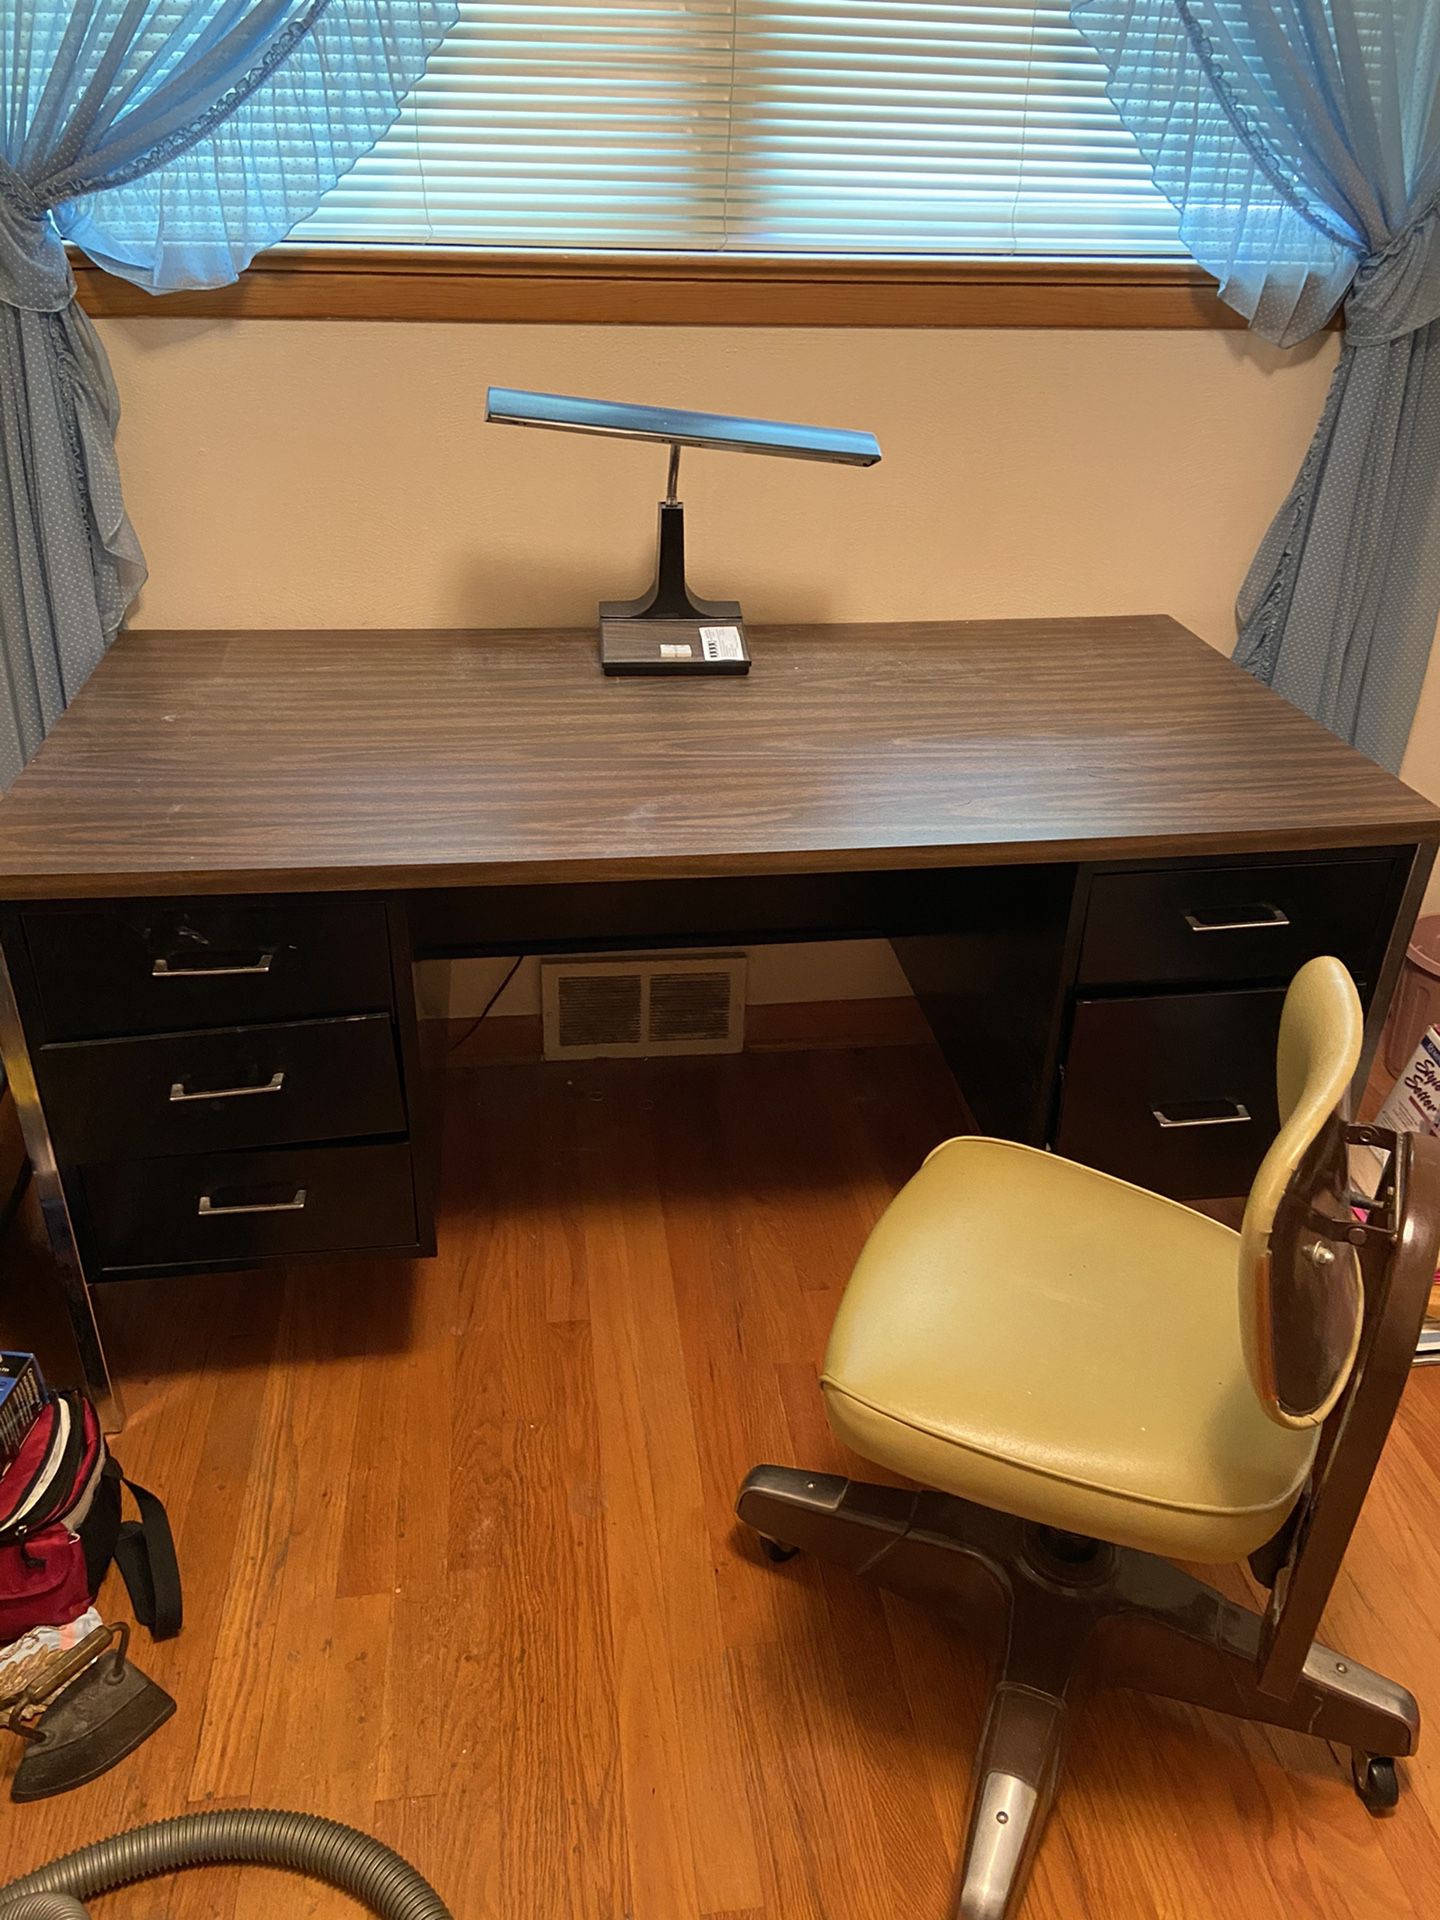 Desk and chair.